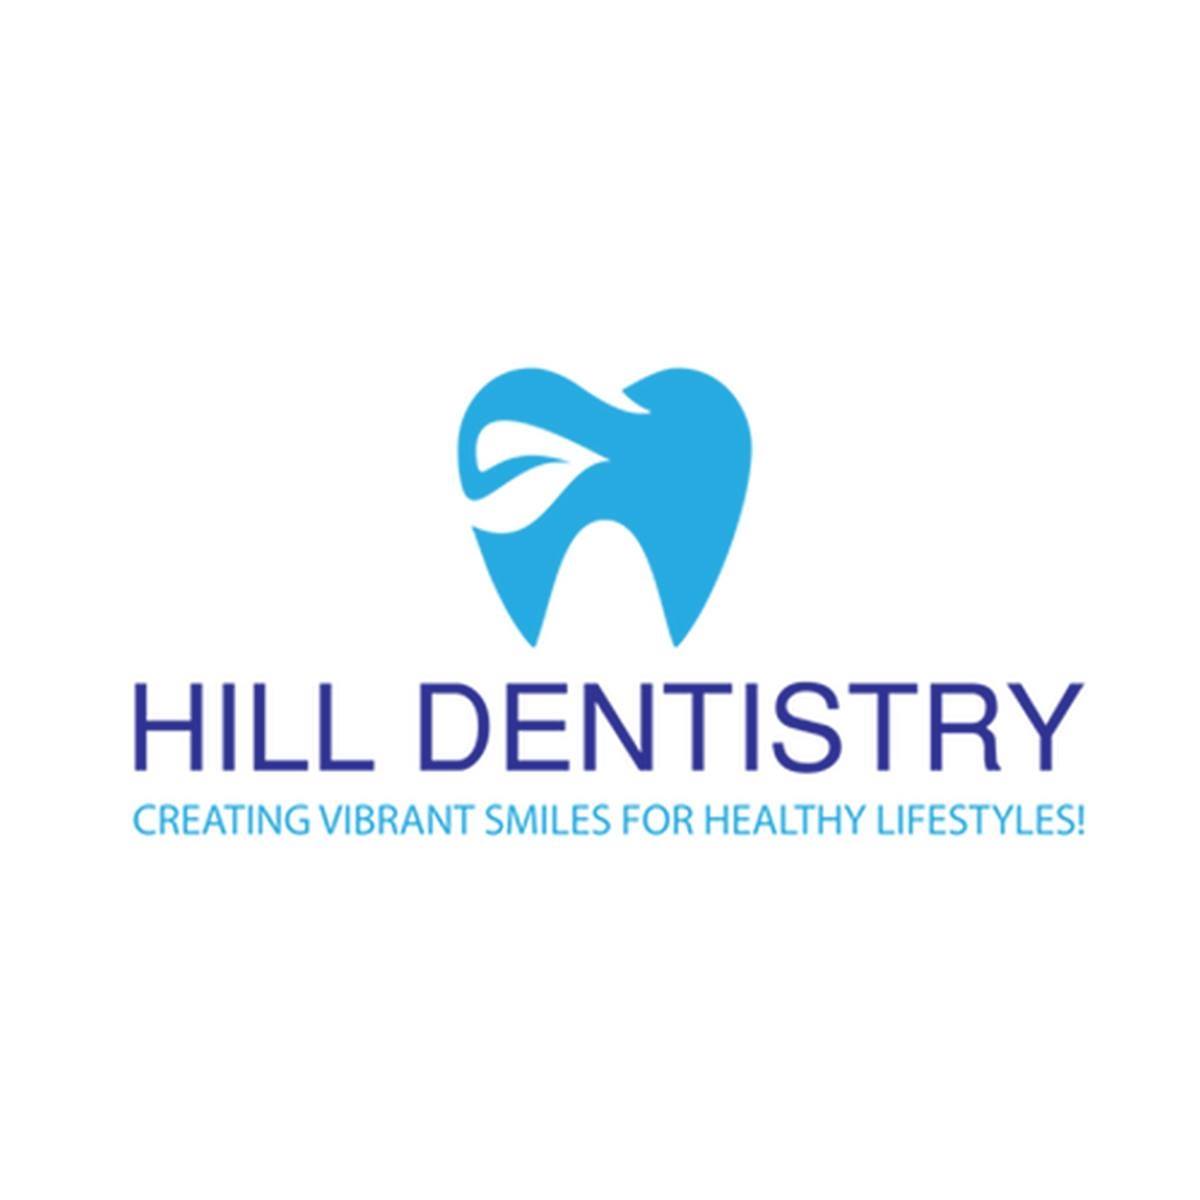 Business logo of Hill Dentistry